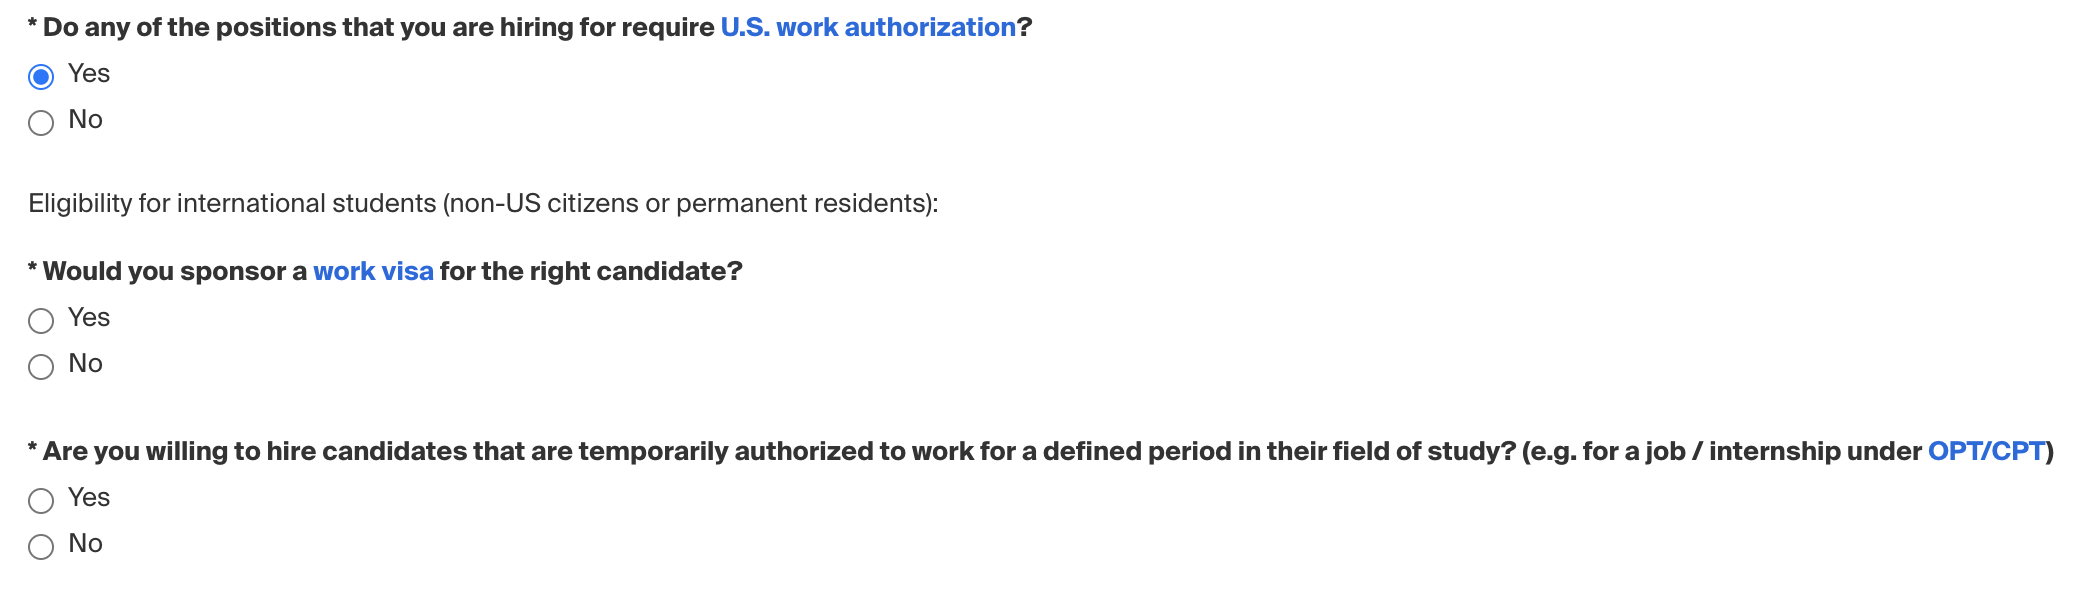 fair_registration_work_auth_questions.png